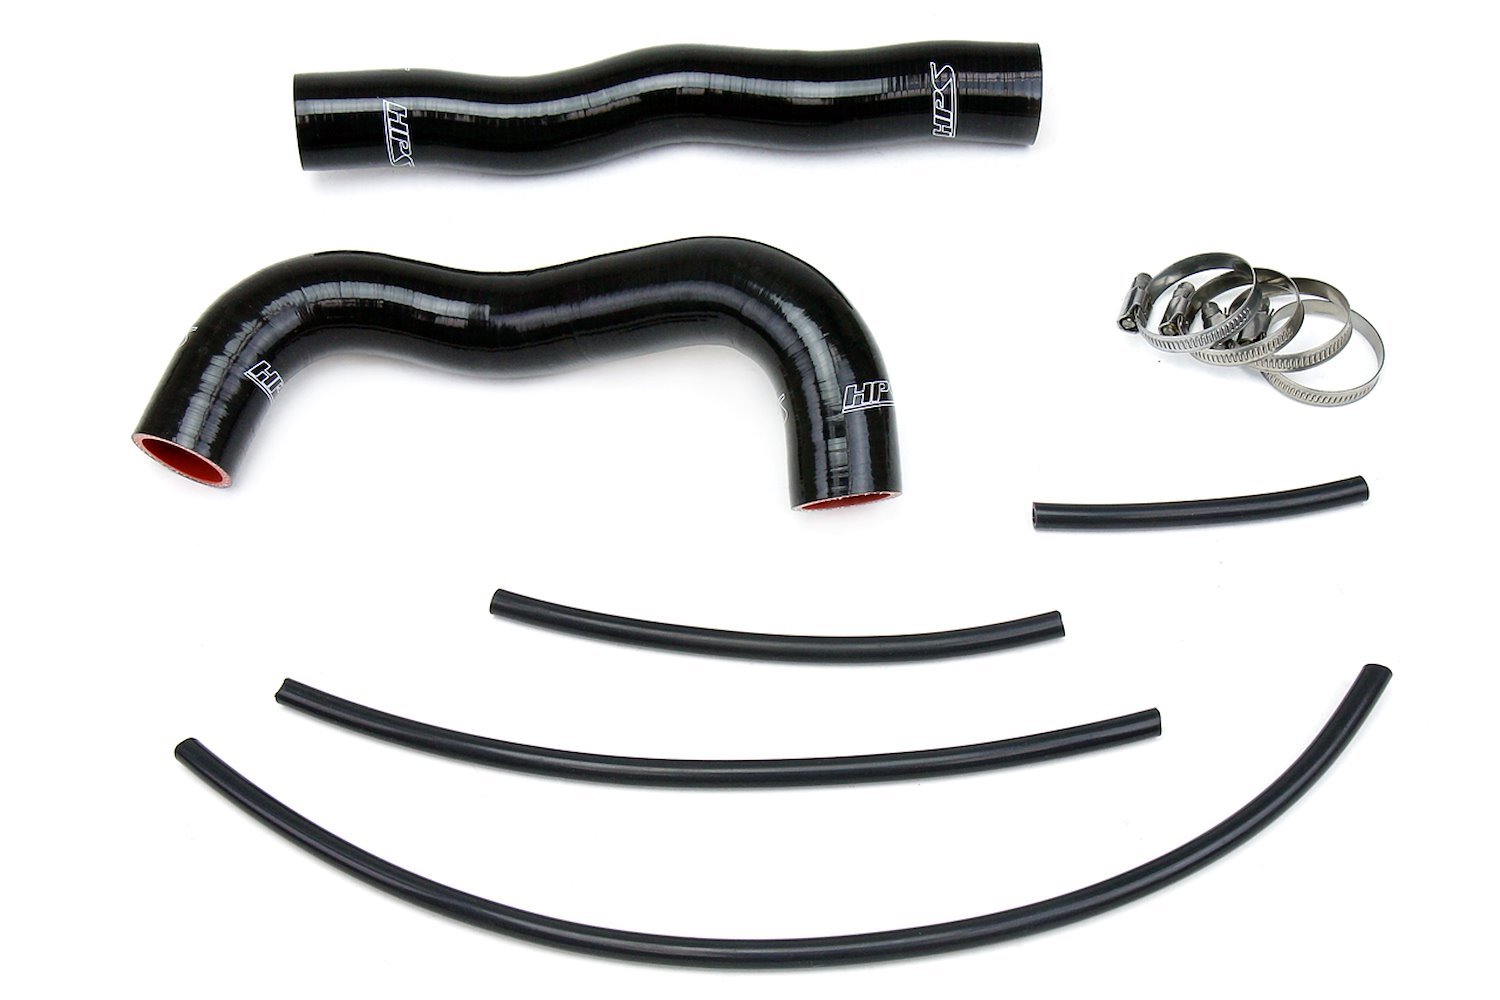 57-1324R-BLK Radiator Hose Kit, High-Temp 3-Ply Reinforced Silicone, Replace OEM Rubber Radiator Coolant Hoses